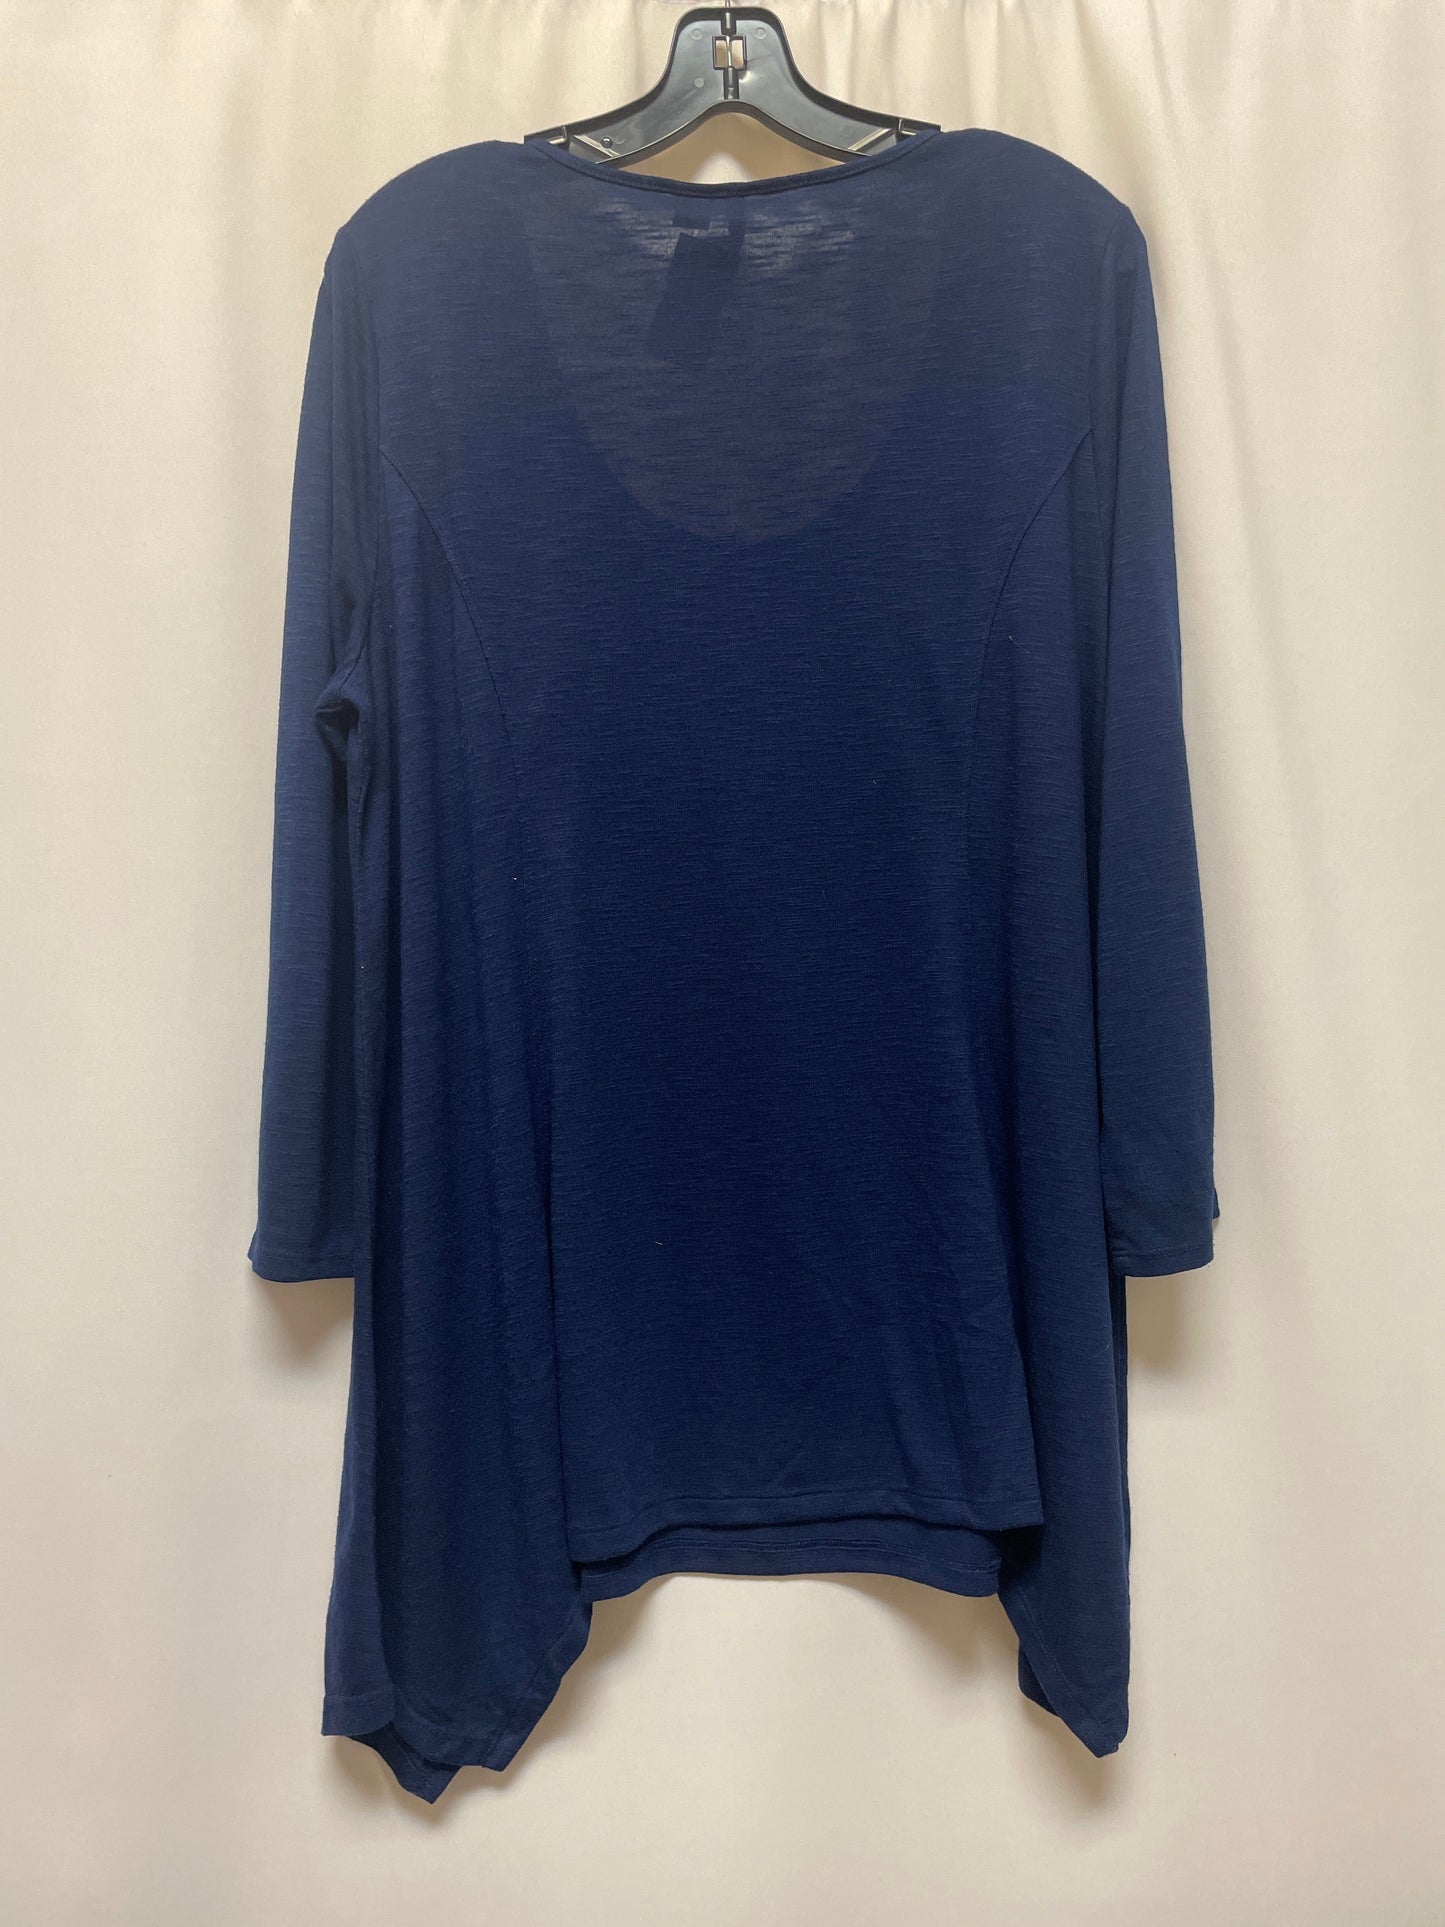 Blue Top Long Sleeve New Directions, Size Xl